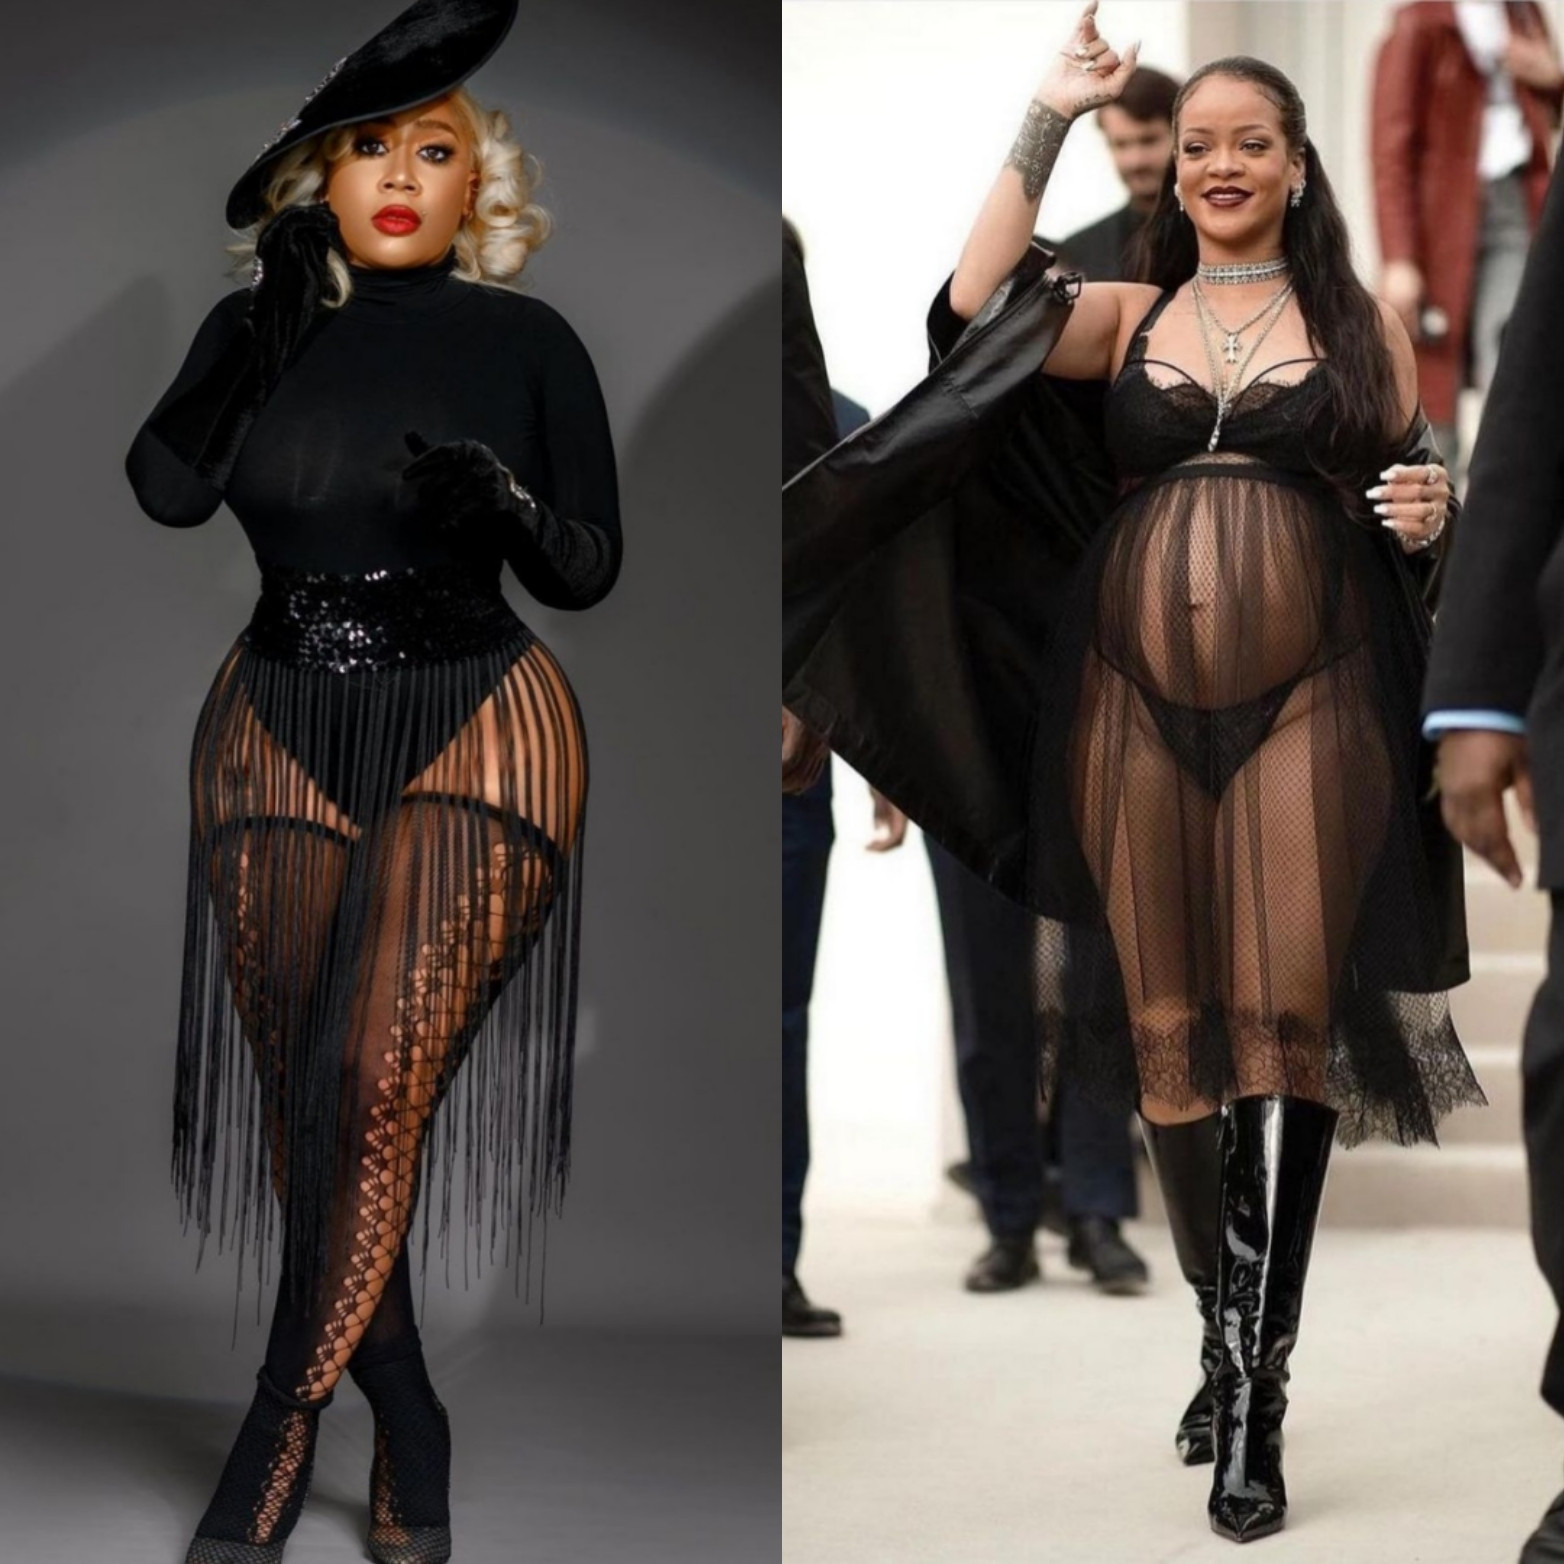 "I will decide to go through pregnancy and society will not let me wear what I like?" Moyo Lawal says as she reacts to revealing dress Rihanna wore to Paris Fashion Week.